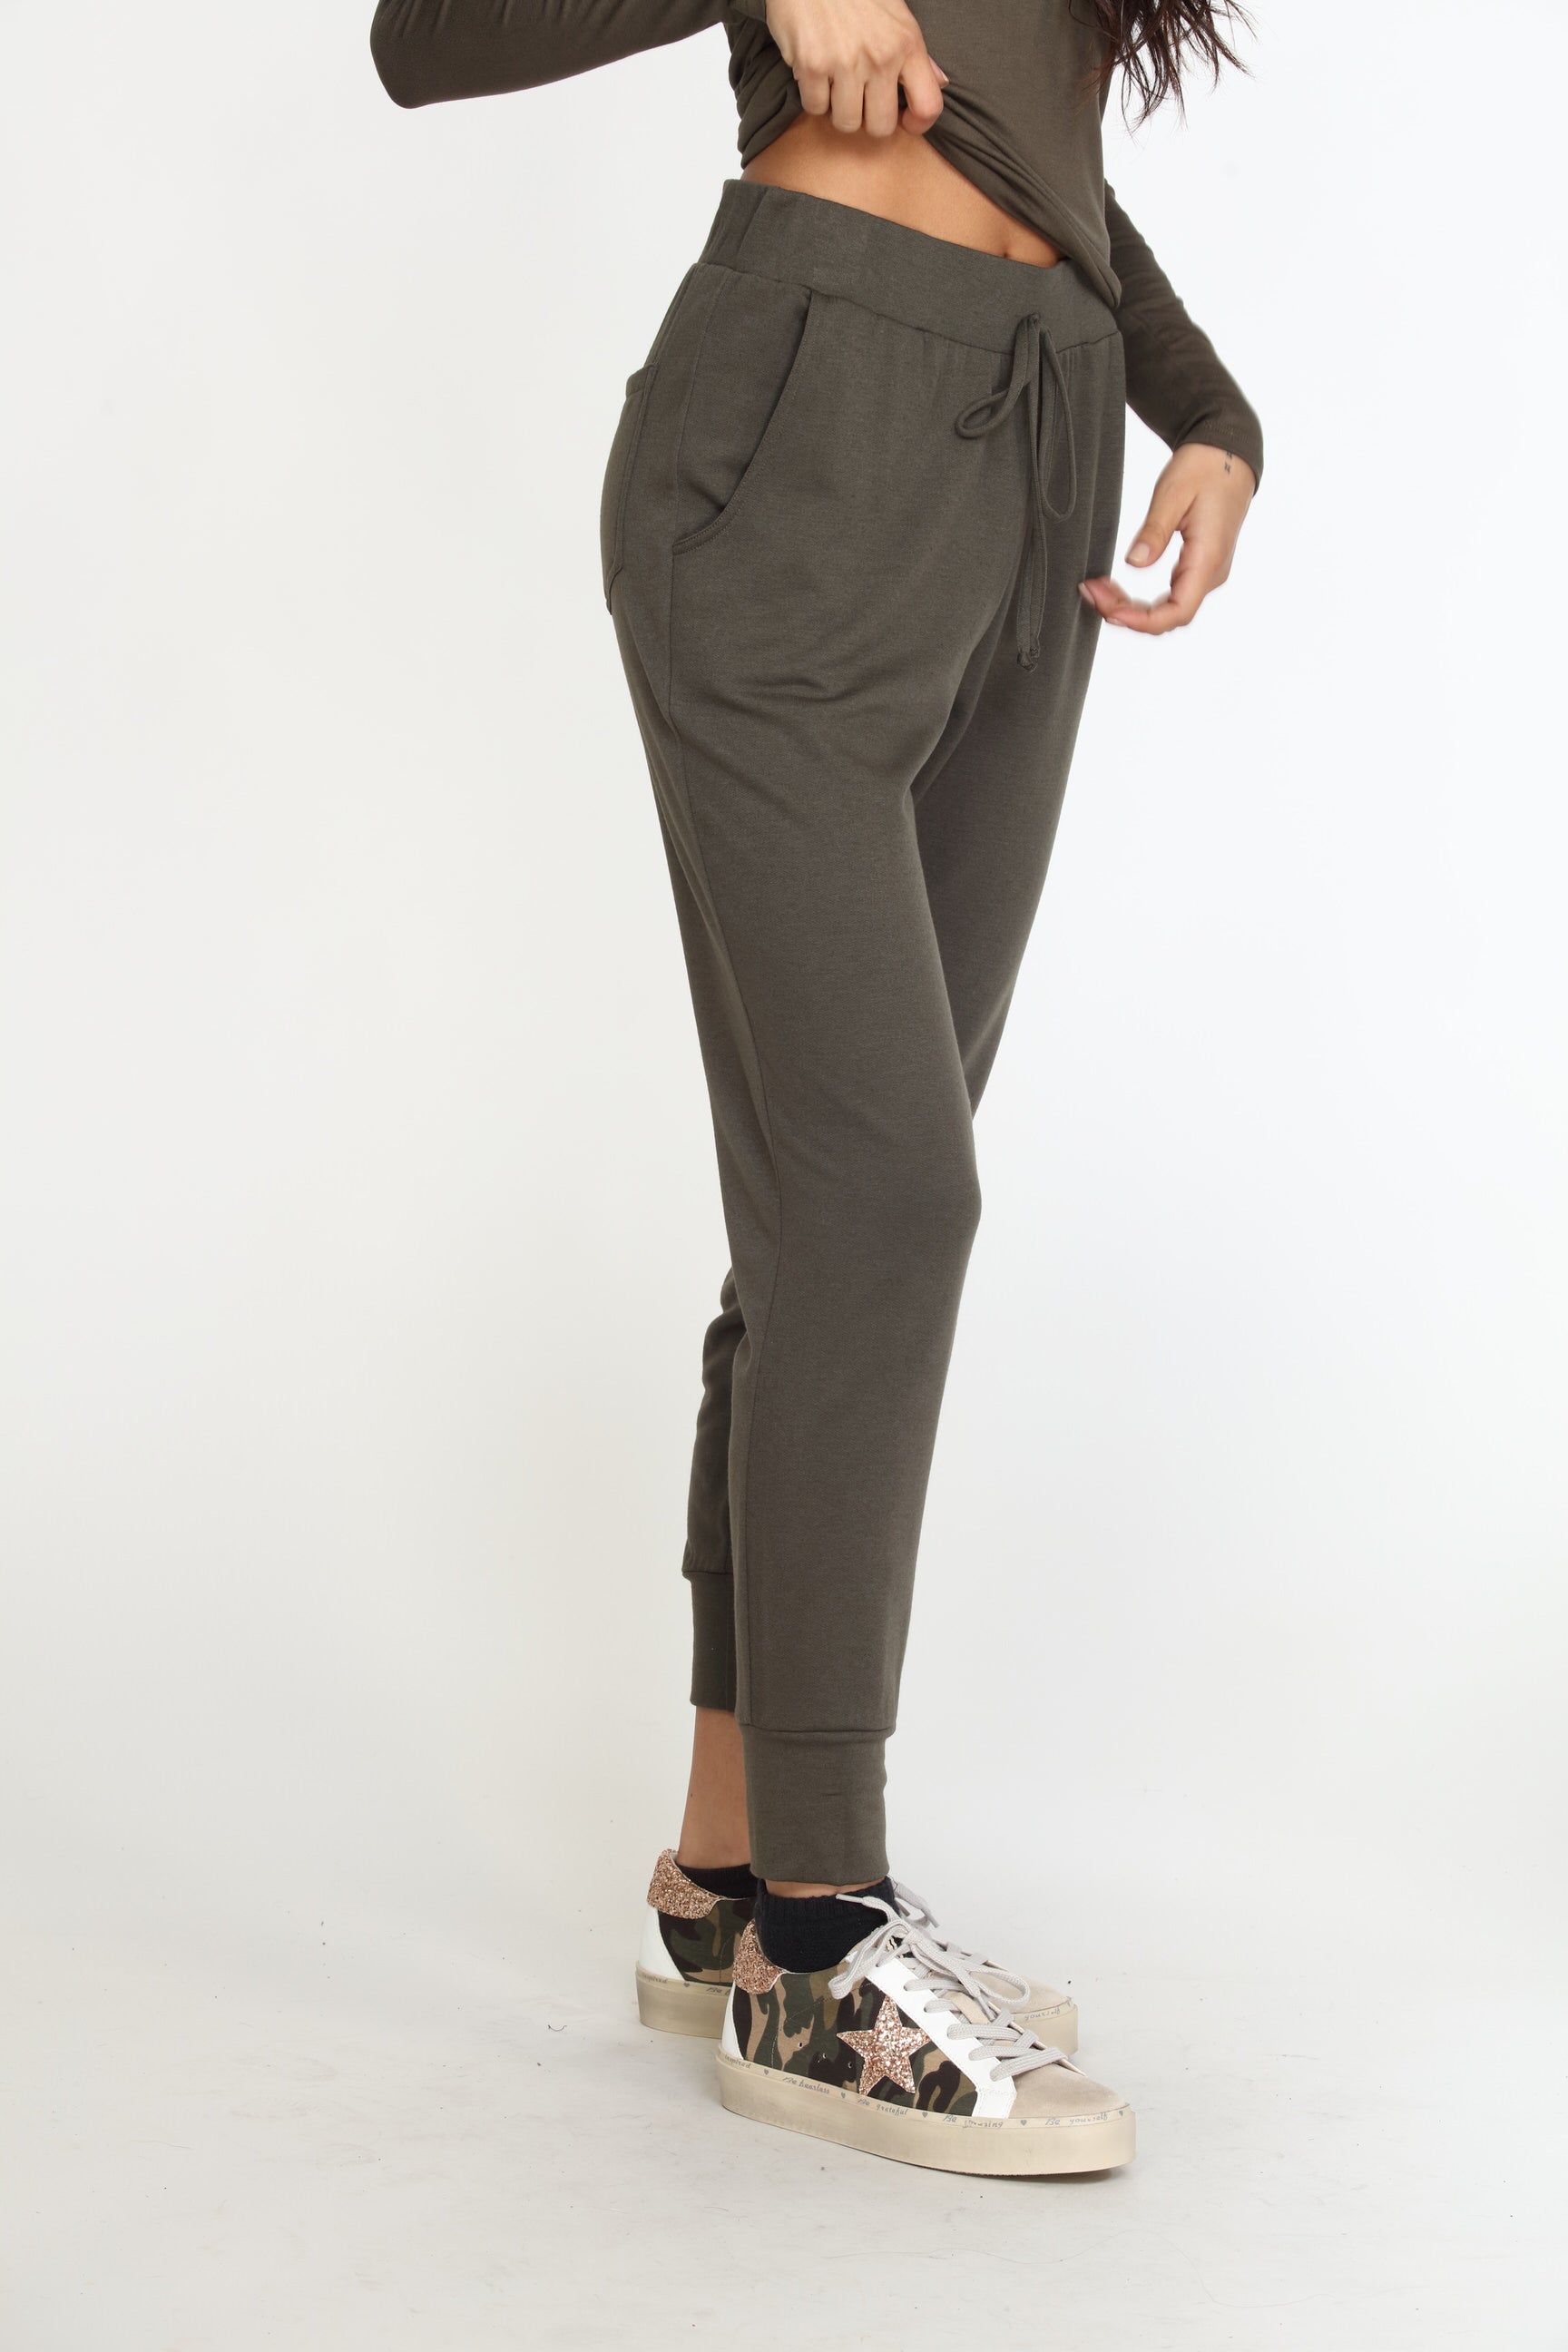 Olive Soft French Terry Joggers - FINAL SALE